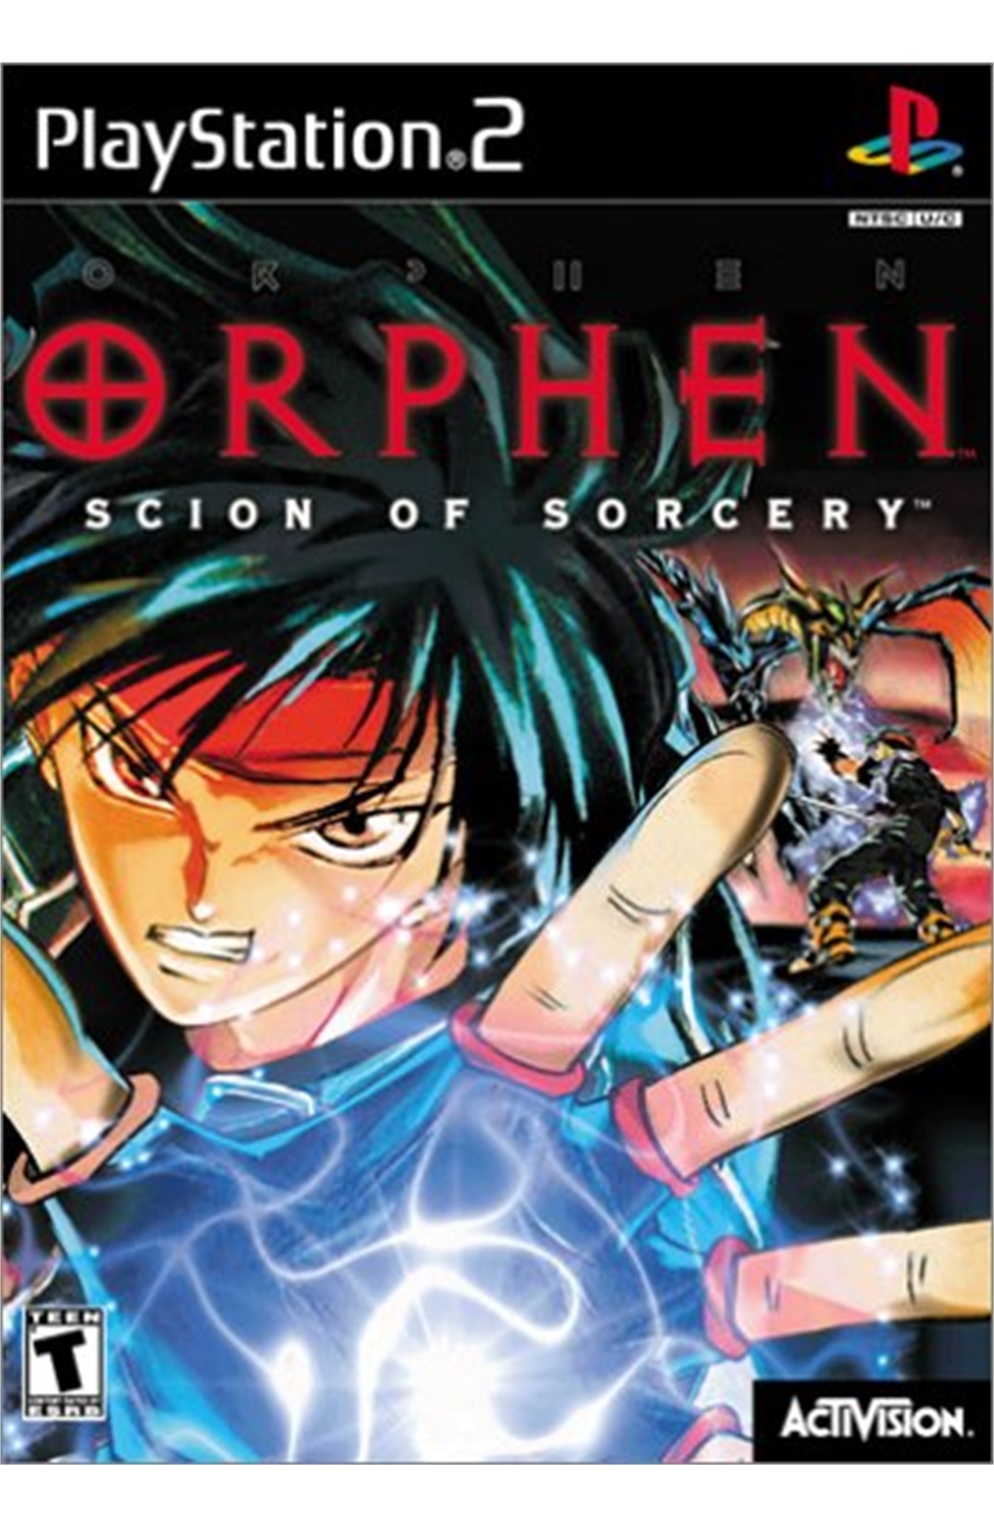 Playstation 2 Ps2 Orpheon: Scion of Sorcery